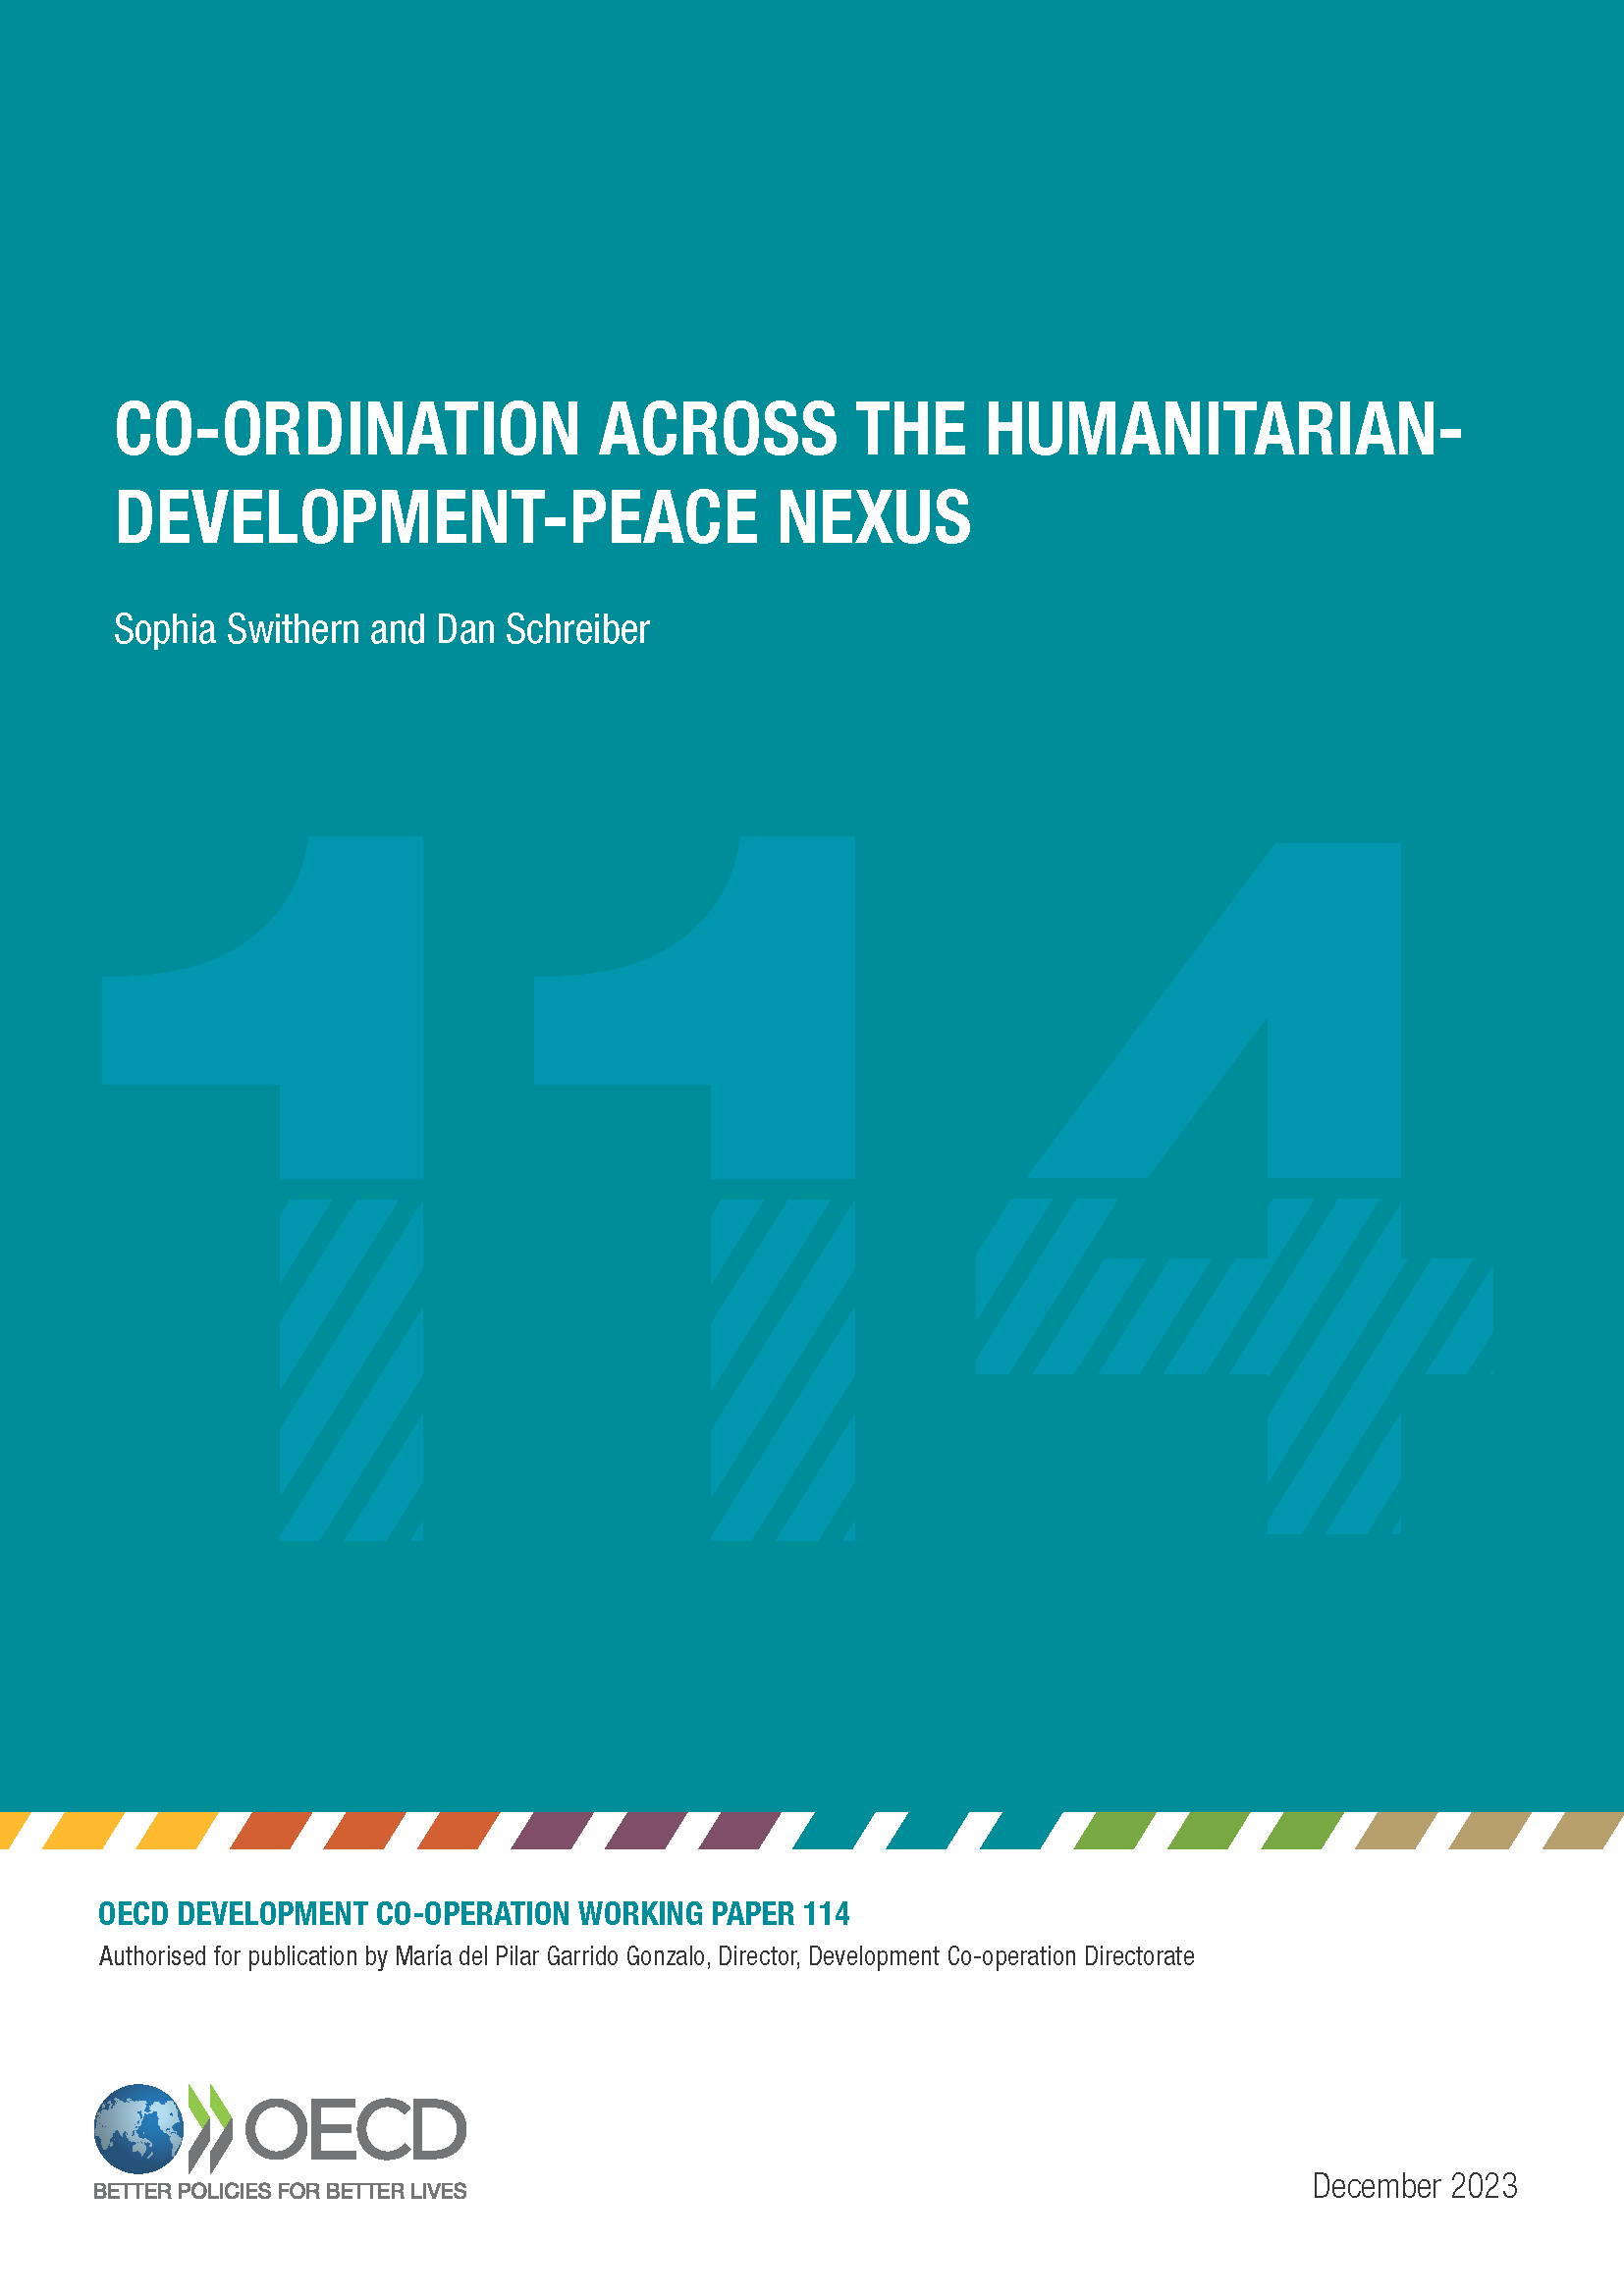 Cover page for Co-ordination Across the Humanitarian-Development-Peace Nexus